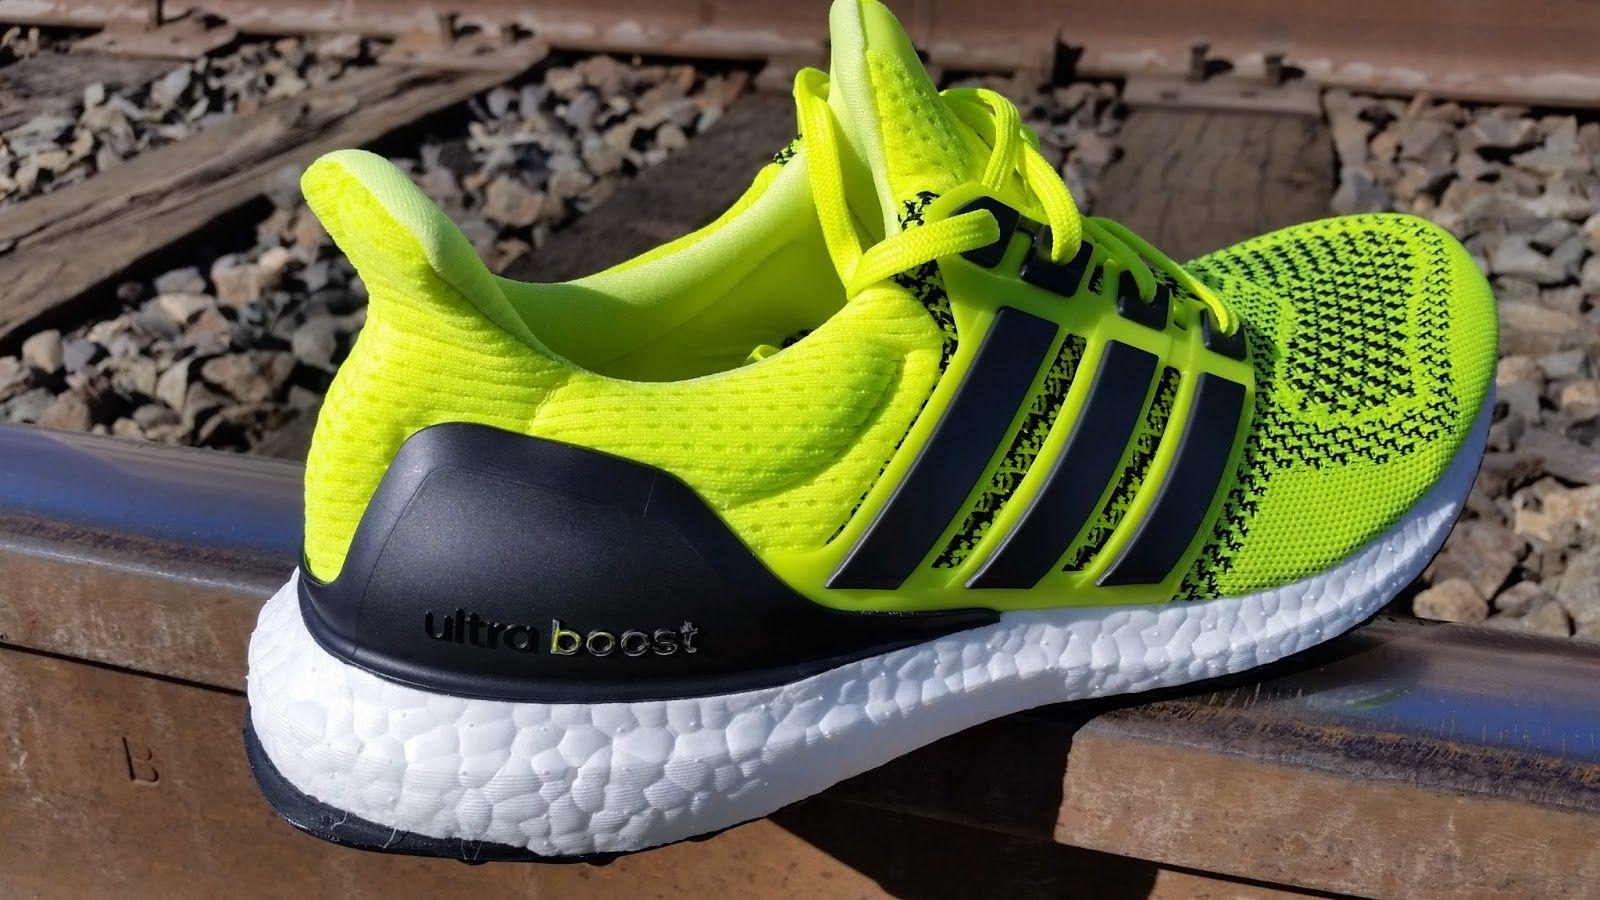 Running Without Injuries: Adidas Ultra Boost Review